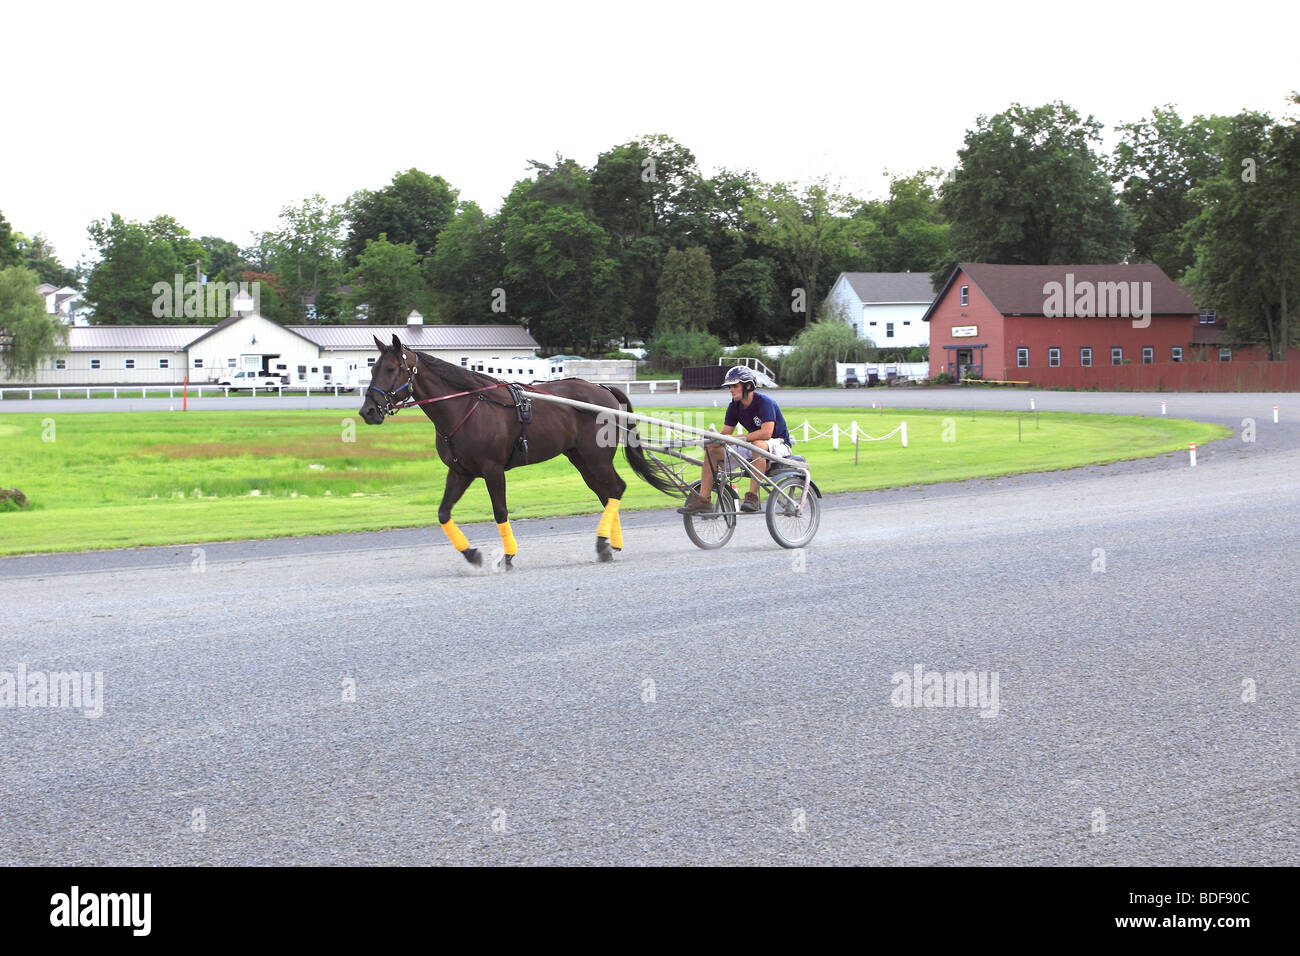 Harness racing horse being trained, Historic Track, Goshen, NY Stock Photo